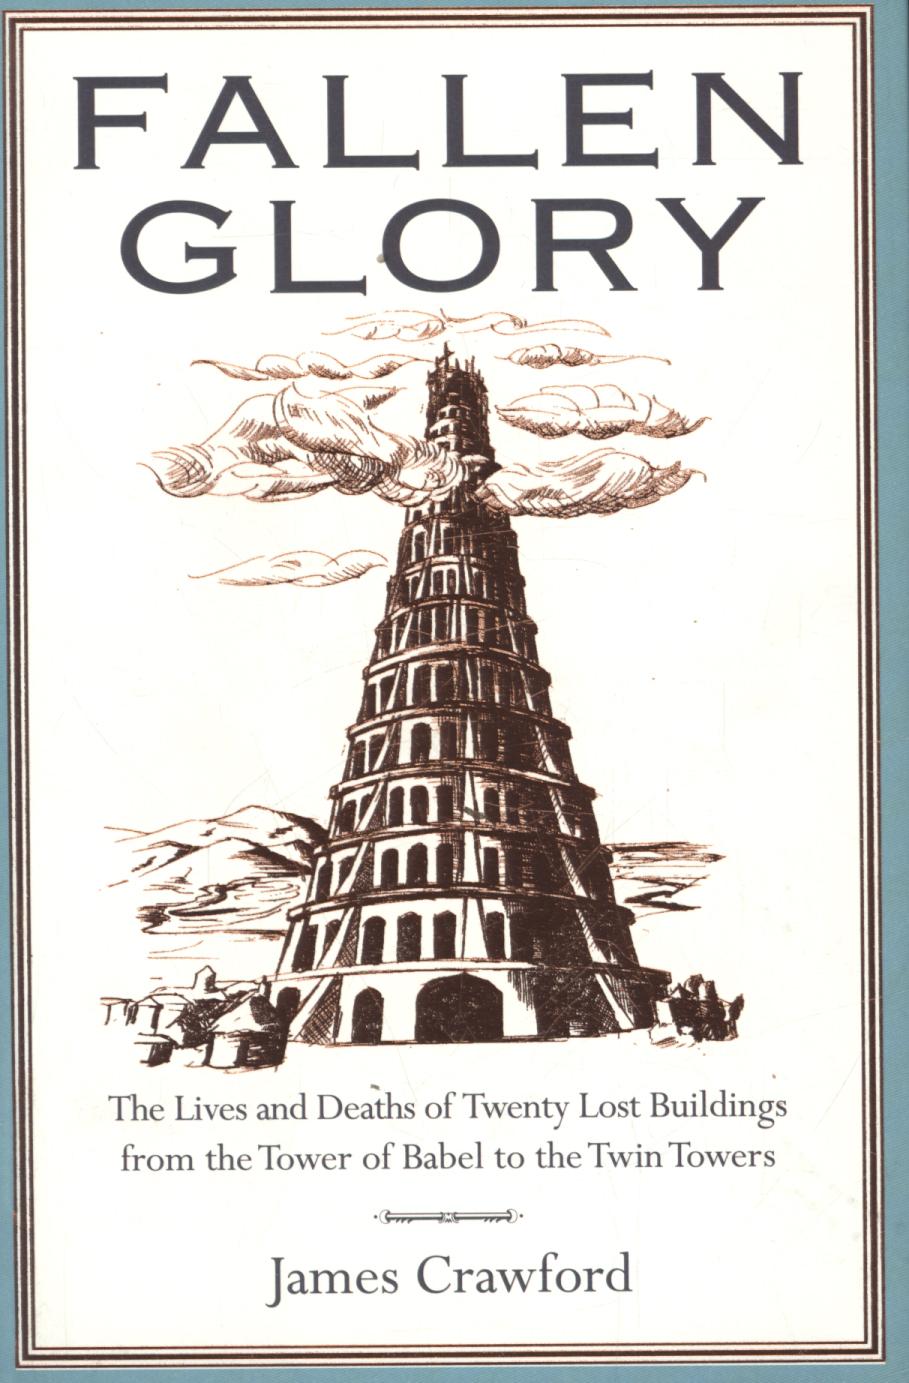 Fallen Glory: The Lives and Deaths of Twenty Lost Buildings from